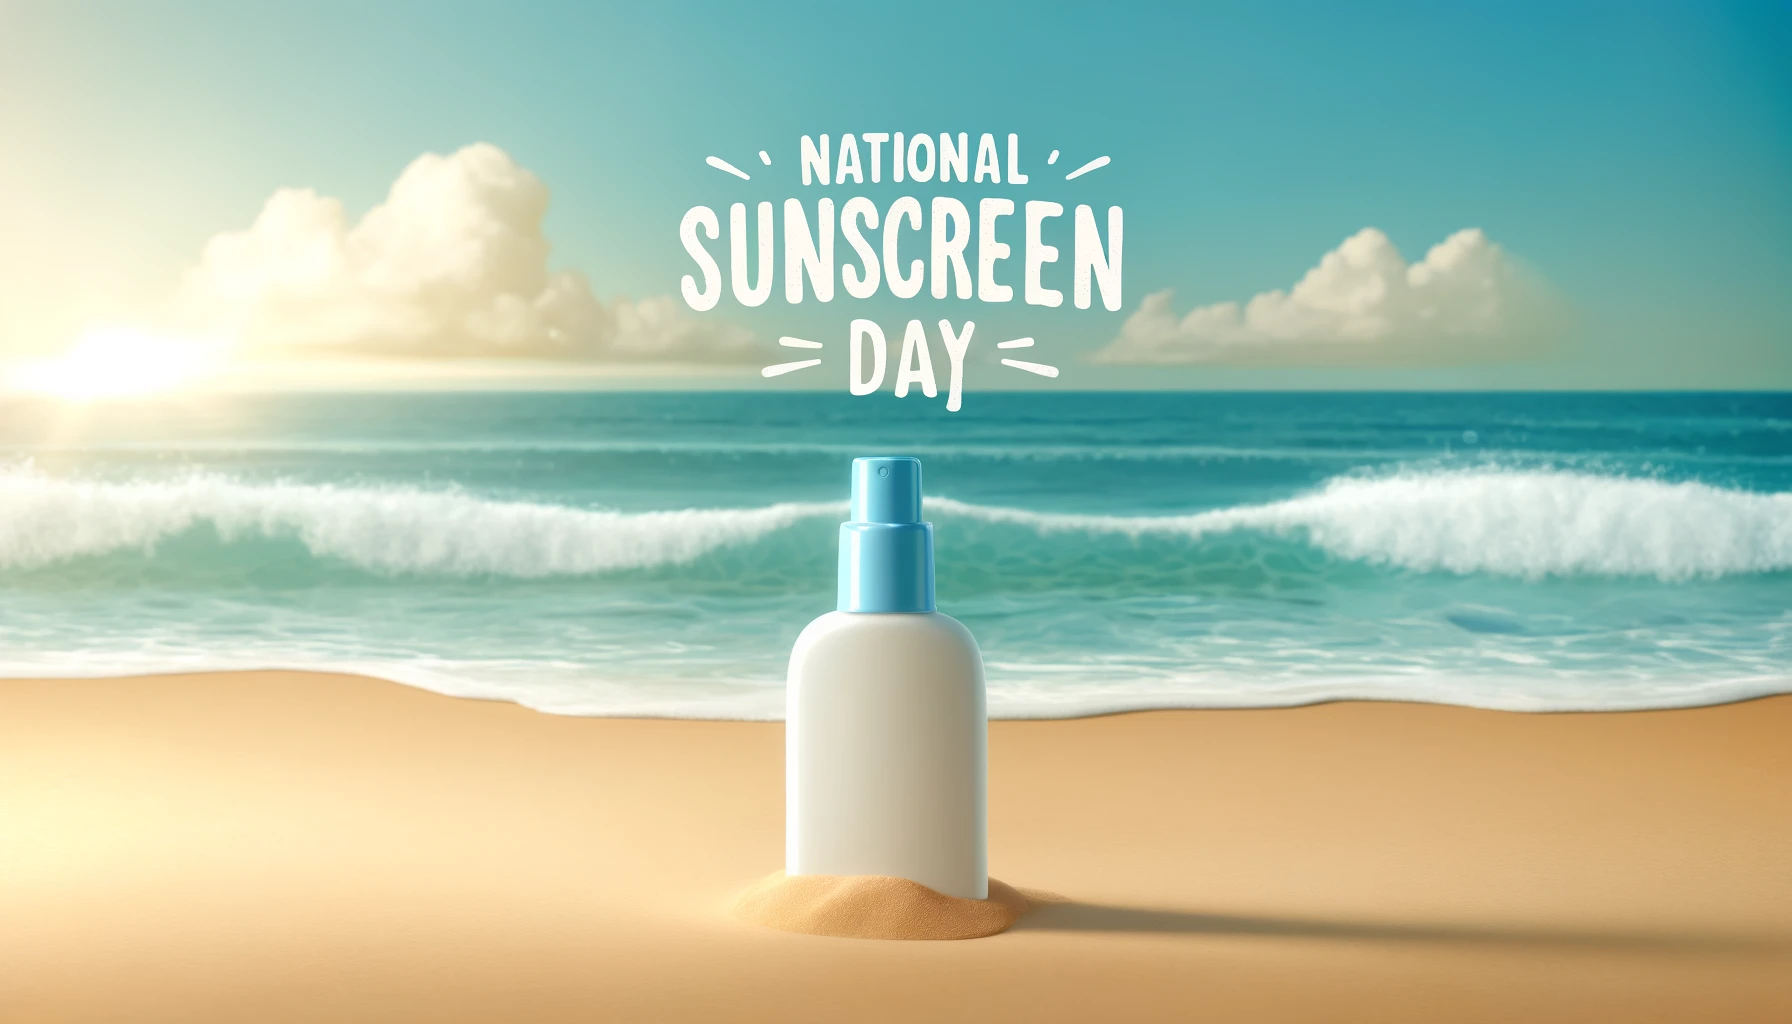 Caring Sunscreen Day Messages to Promote Skin Health